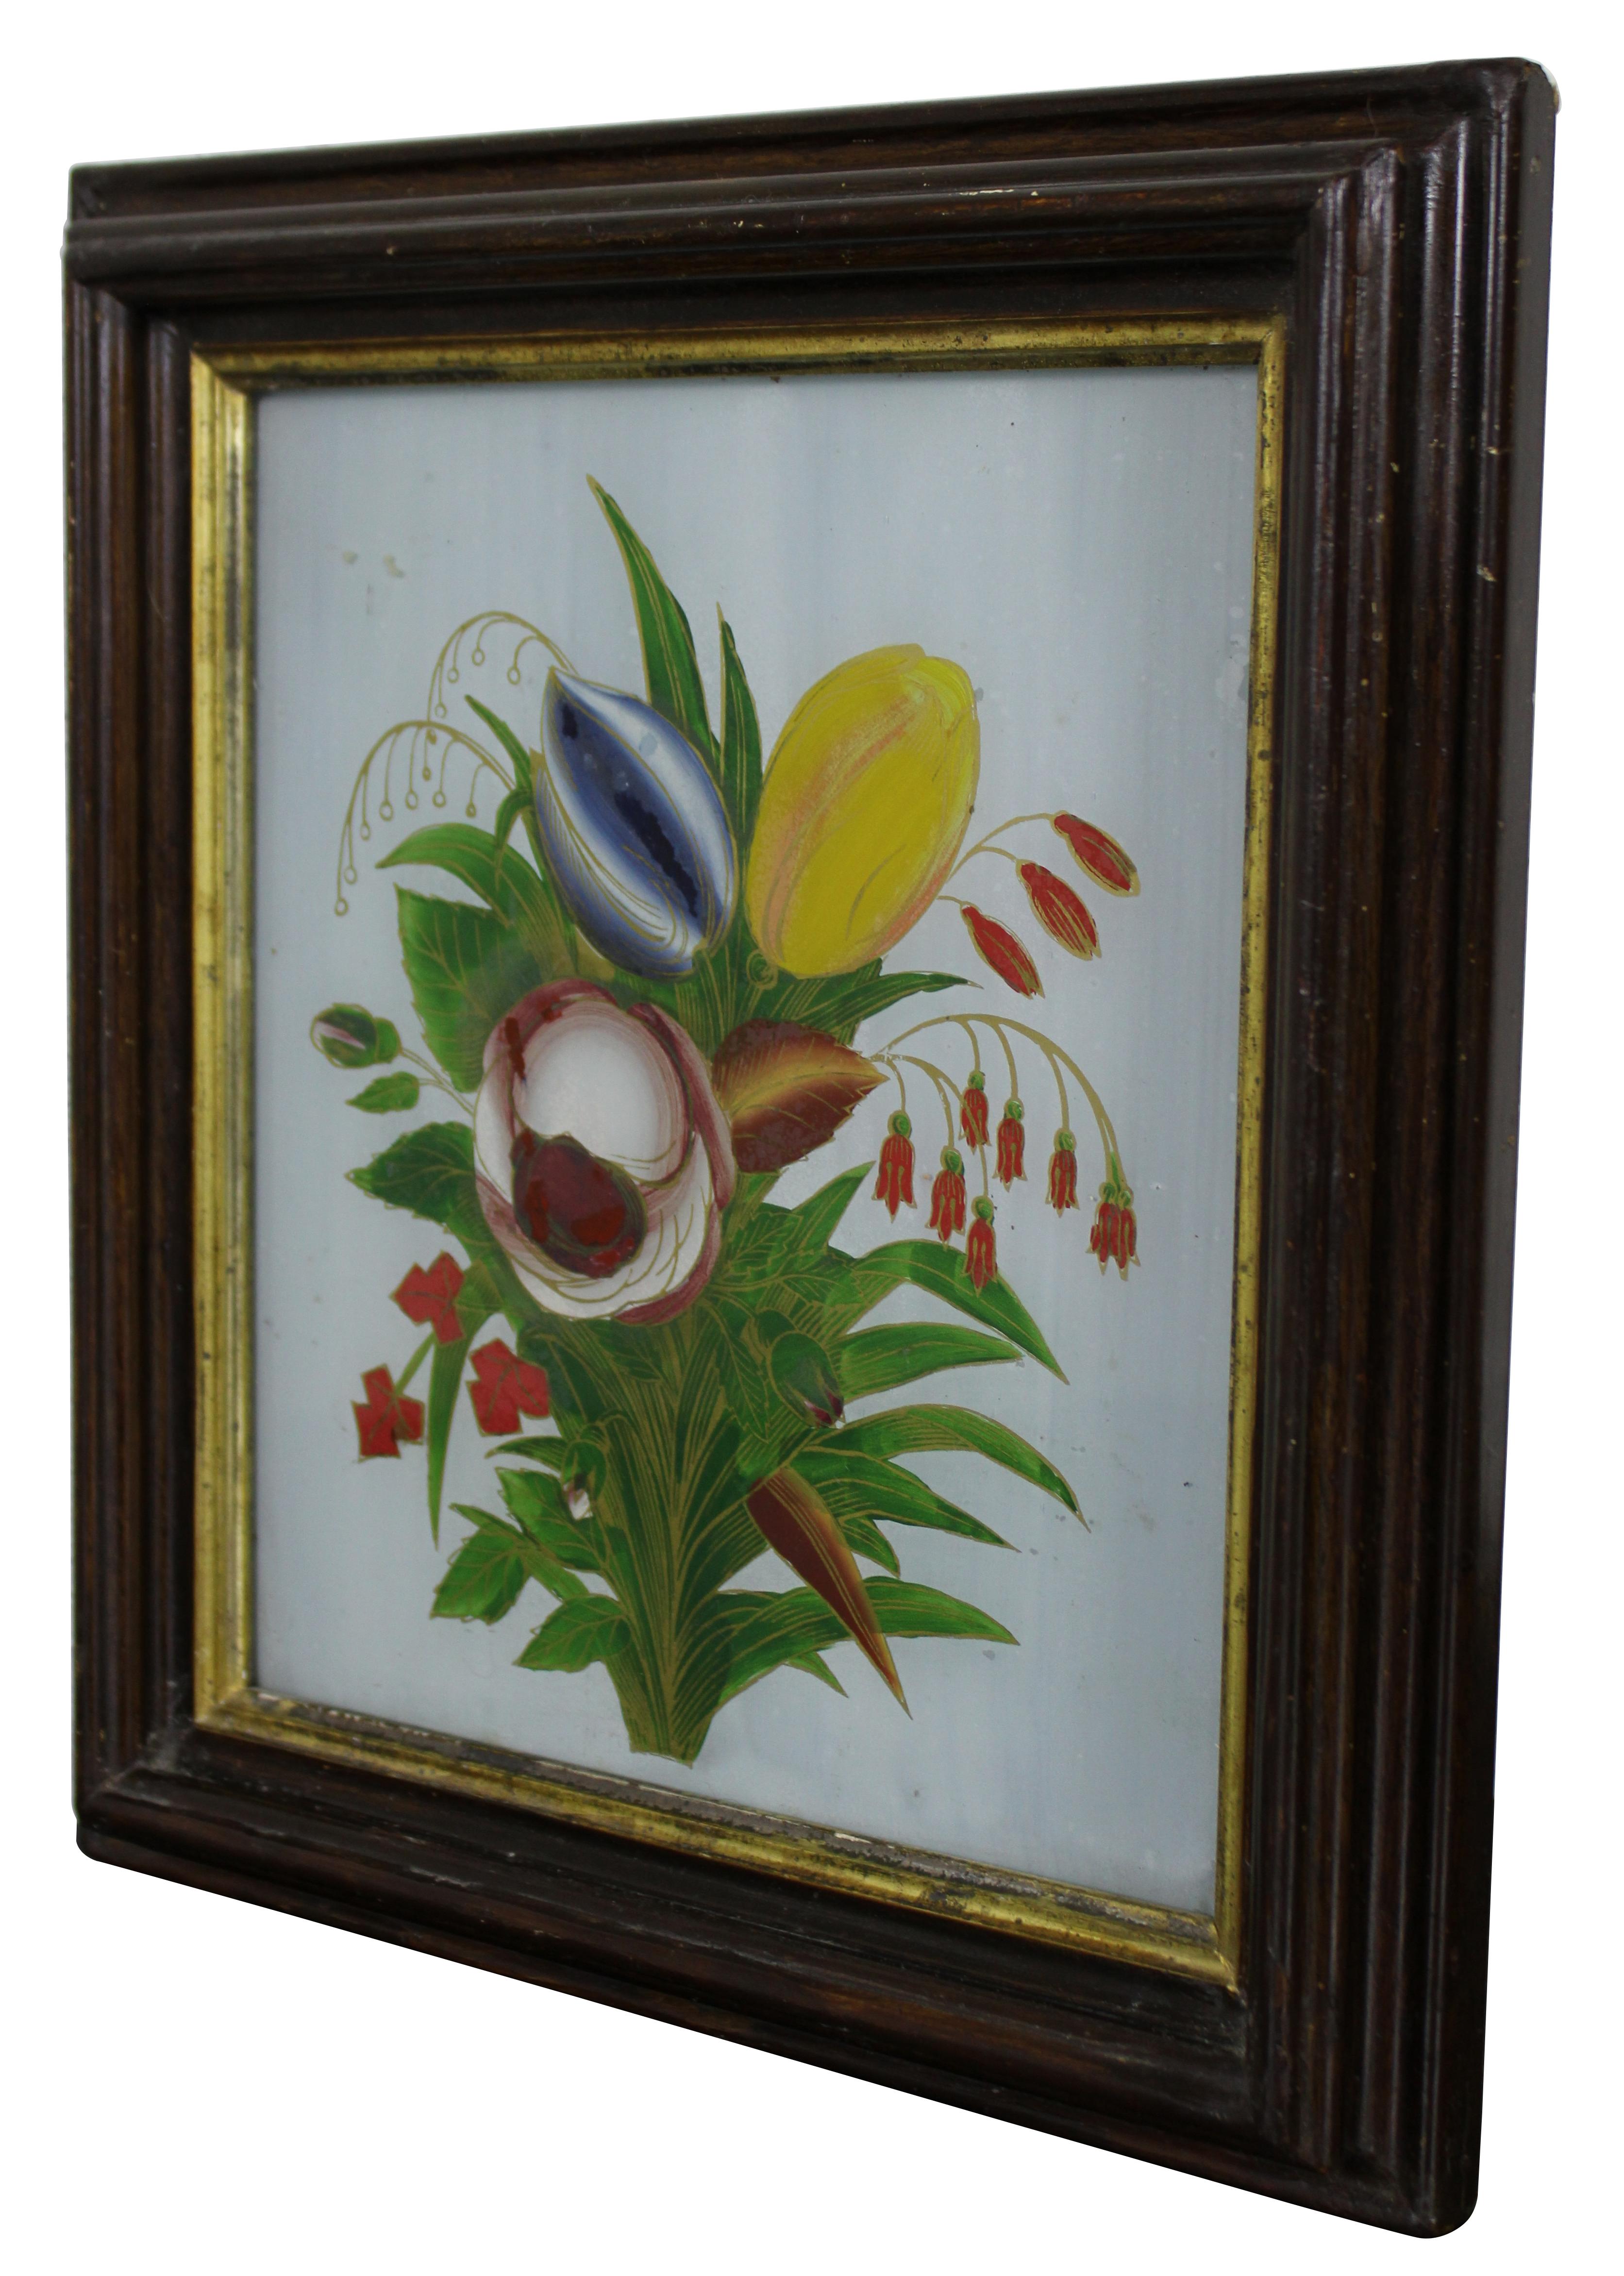 Antique floral botanical still life oil painting, reverse painted on glass, featuring a brightly colored flower arrangement with gold gilded accents.

Measures: 10.5” x 1.25” x 11.5” / Sans frame - 7.5” x 8.5” (width x depth x height).